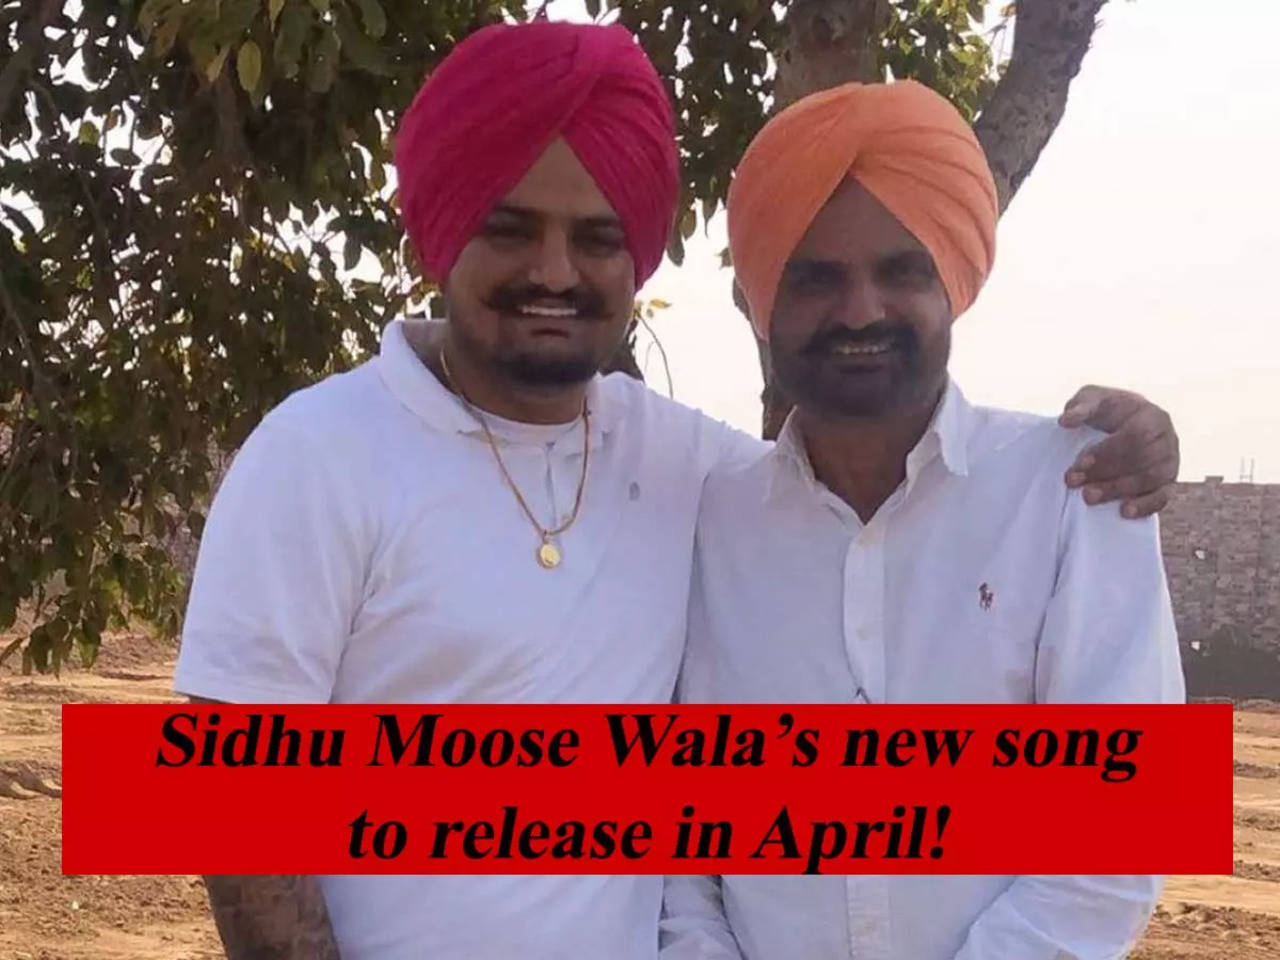 Sidhu Moose Wala News Song: Late Singer Sidhu Moose Wala'S New Song To  Release In April; Father Balkaur Singh Confirms | - Times Of India